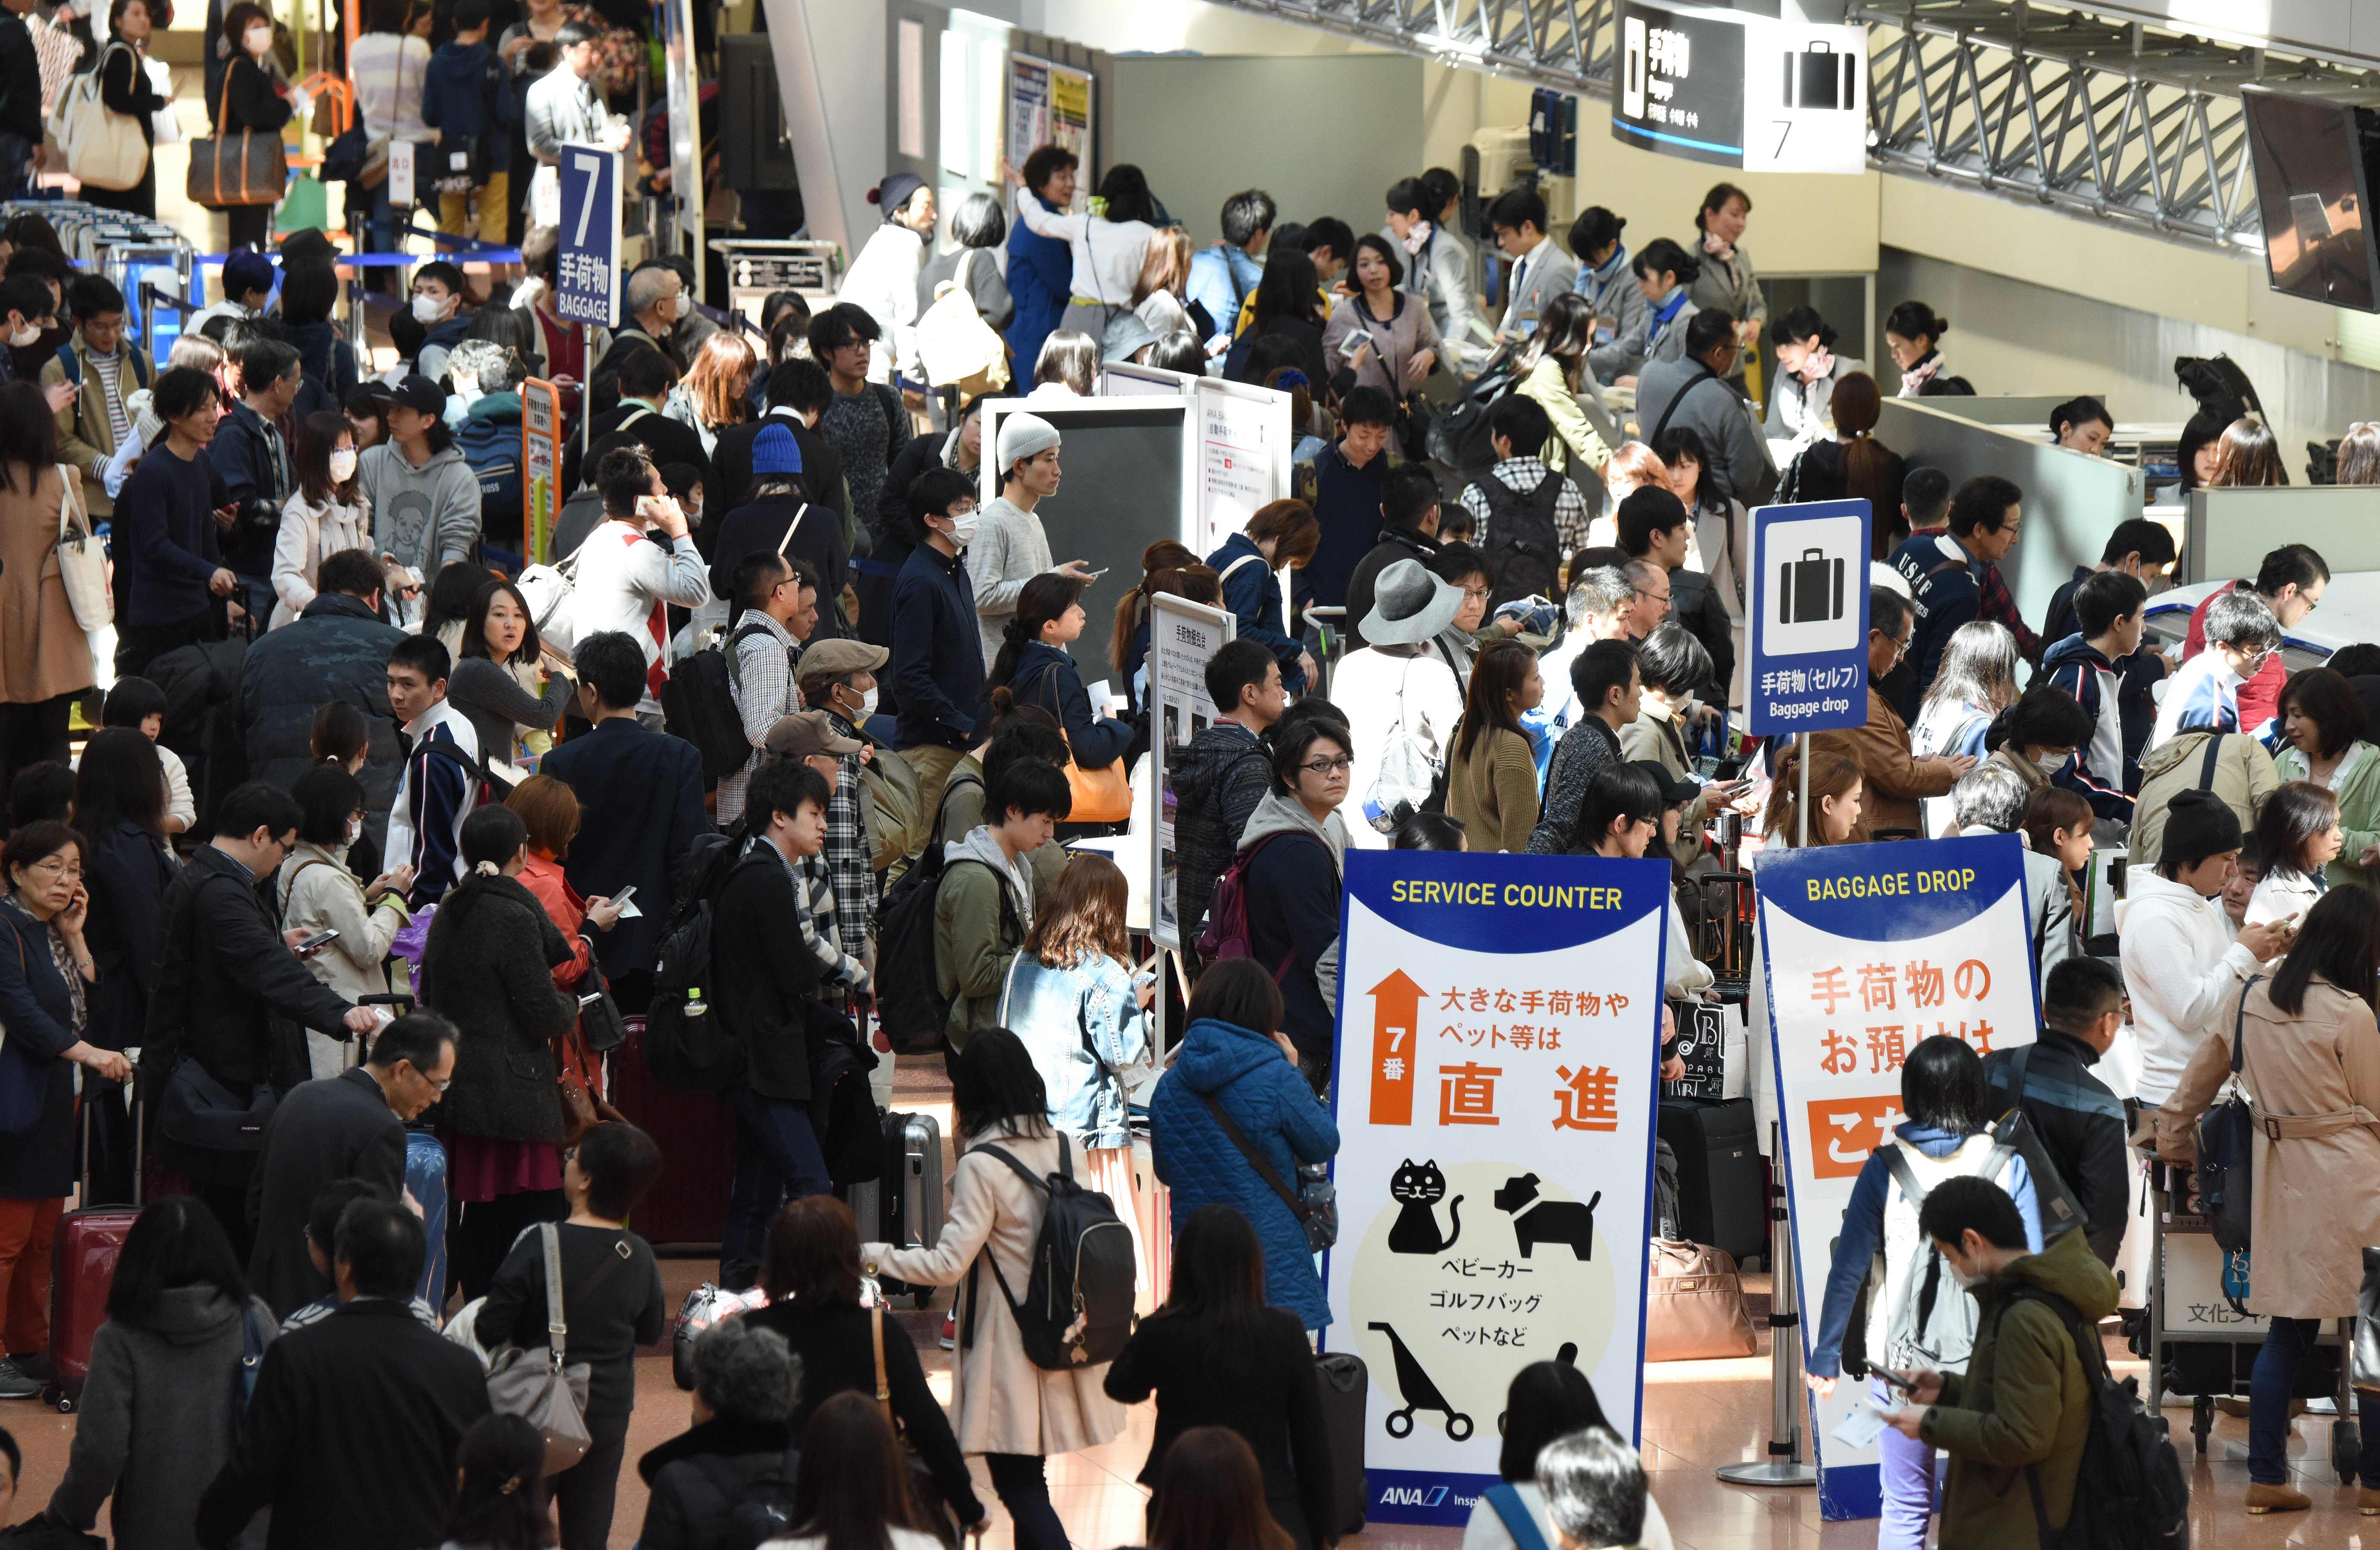 People wait at the ANA counter at Haneda airport on March 22. Staff from Haneda, Narita and Kansai airports said that they already operate at a heightened level of security and therefore do not plan to introduce fresh measures at the moment. | AFP-JIJI